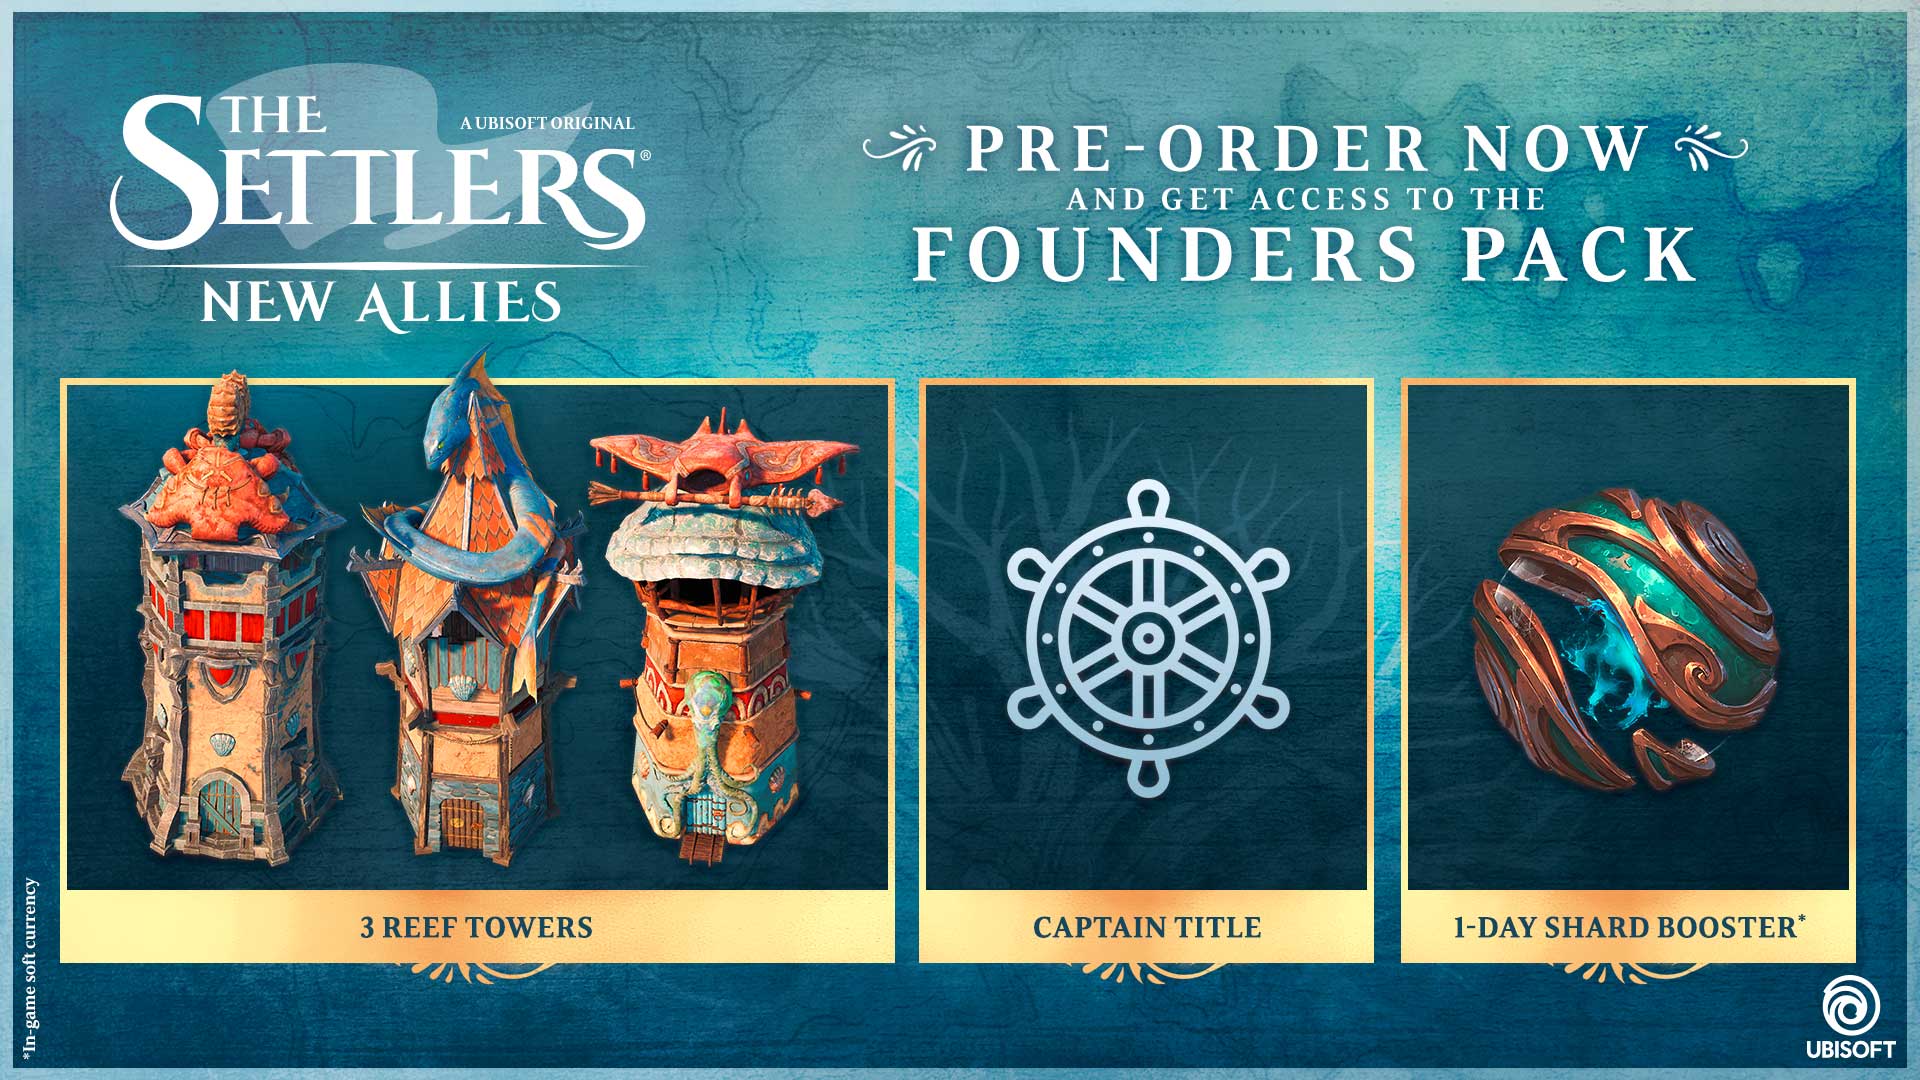 Redeeming your The Settlers: New Allies pre-order code | Ubisoft Help